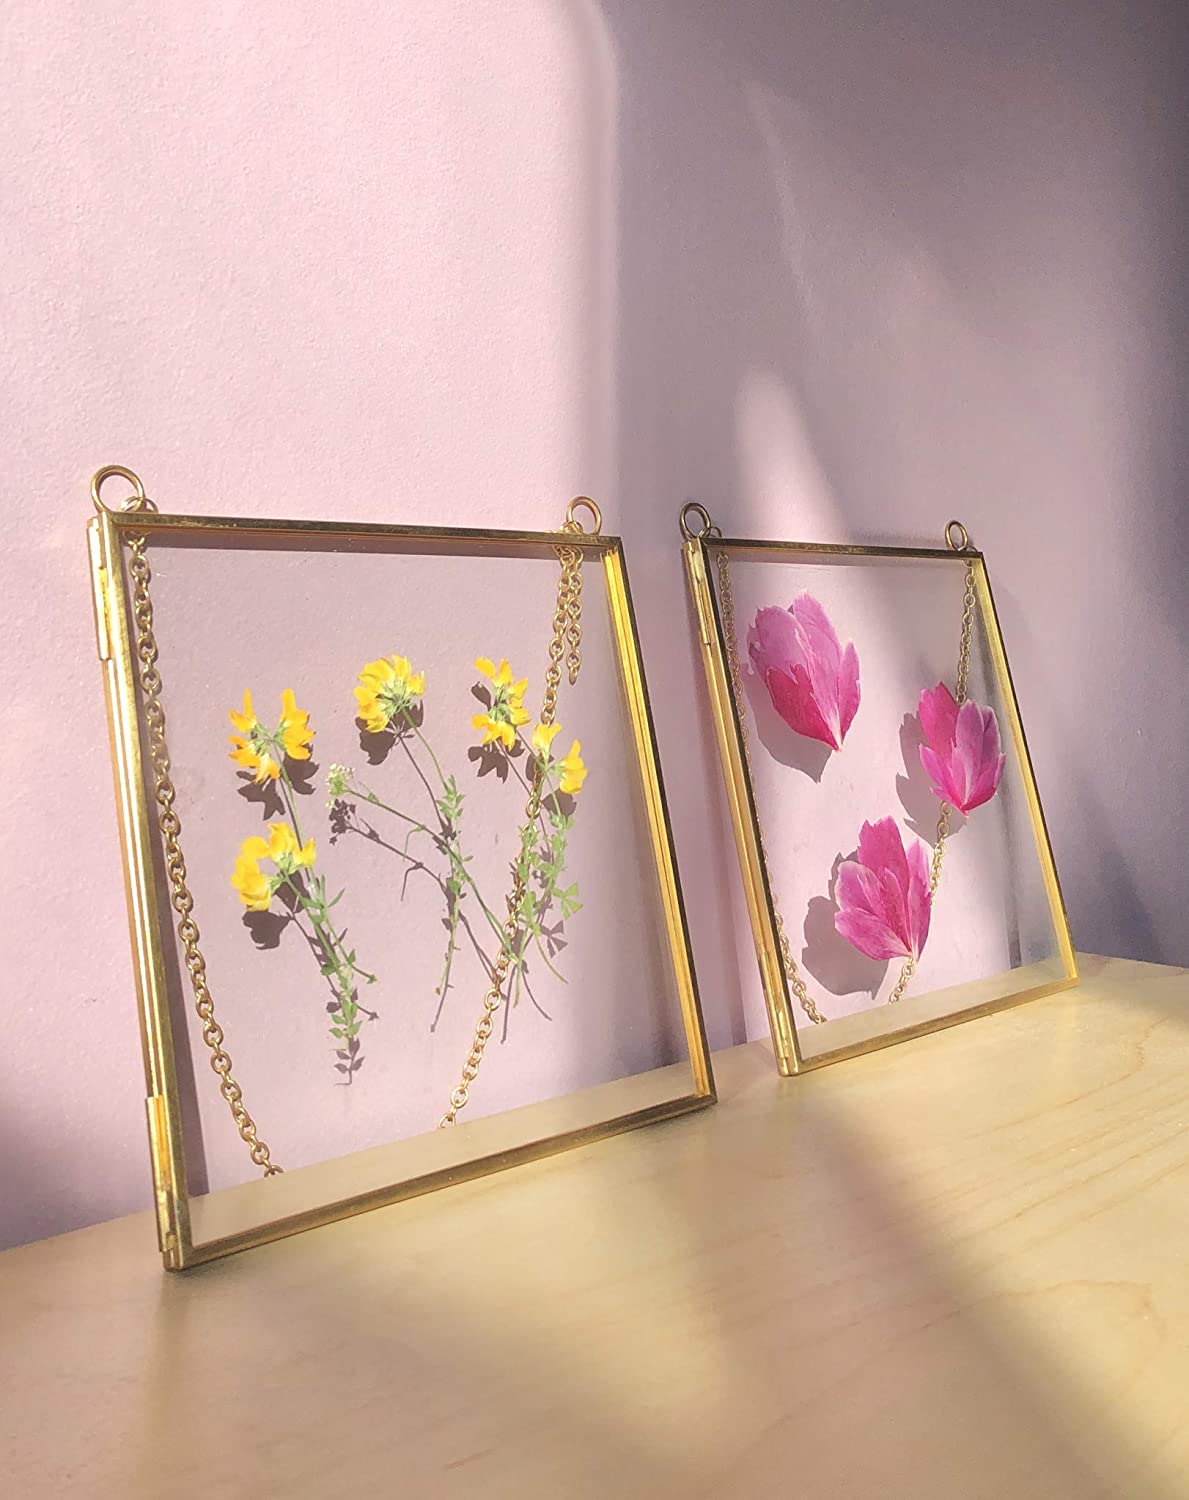  Beedecor Double Glass Frame for Pressed Flowers, Leaf and  Artwork - Set of 2 Hanging Picture Frames, Tempered Glass Floating Pressed  Flower Frames, Large Rectangular Wall Decor Photo Display, Clear